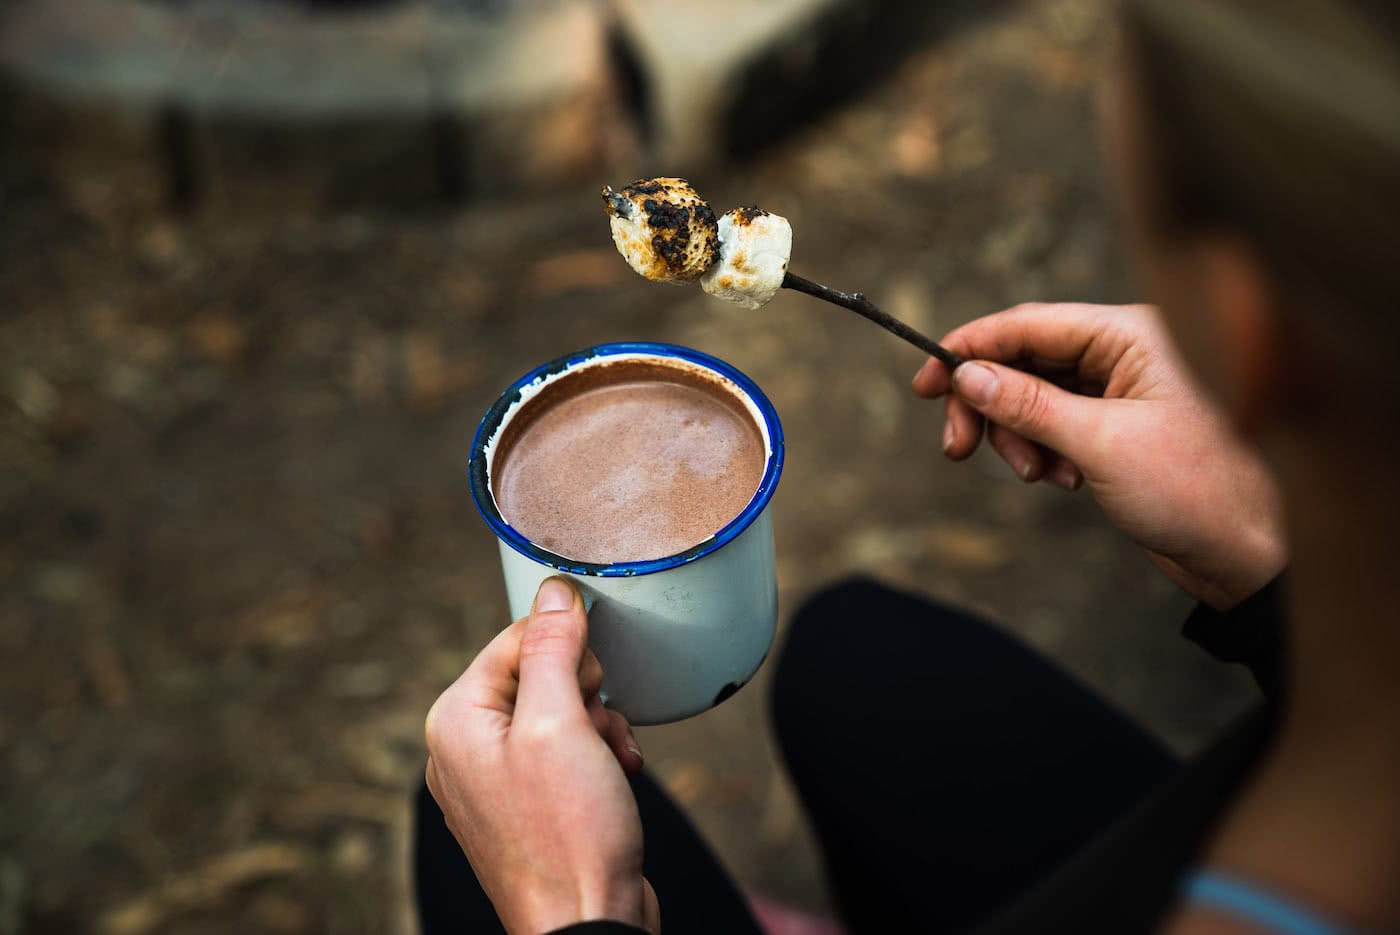 This Boozy Hot Choccy Is The Perfect Nightcap For Camping, photo Jonathan Tan, stick, marshmallows, hand, hot chocolate, woman